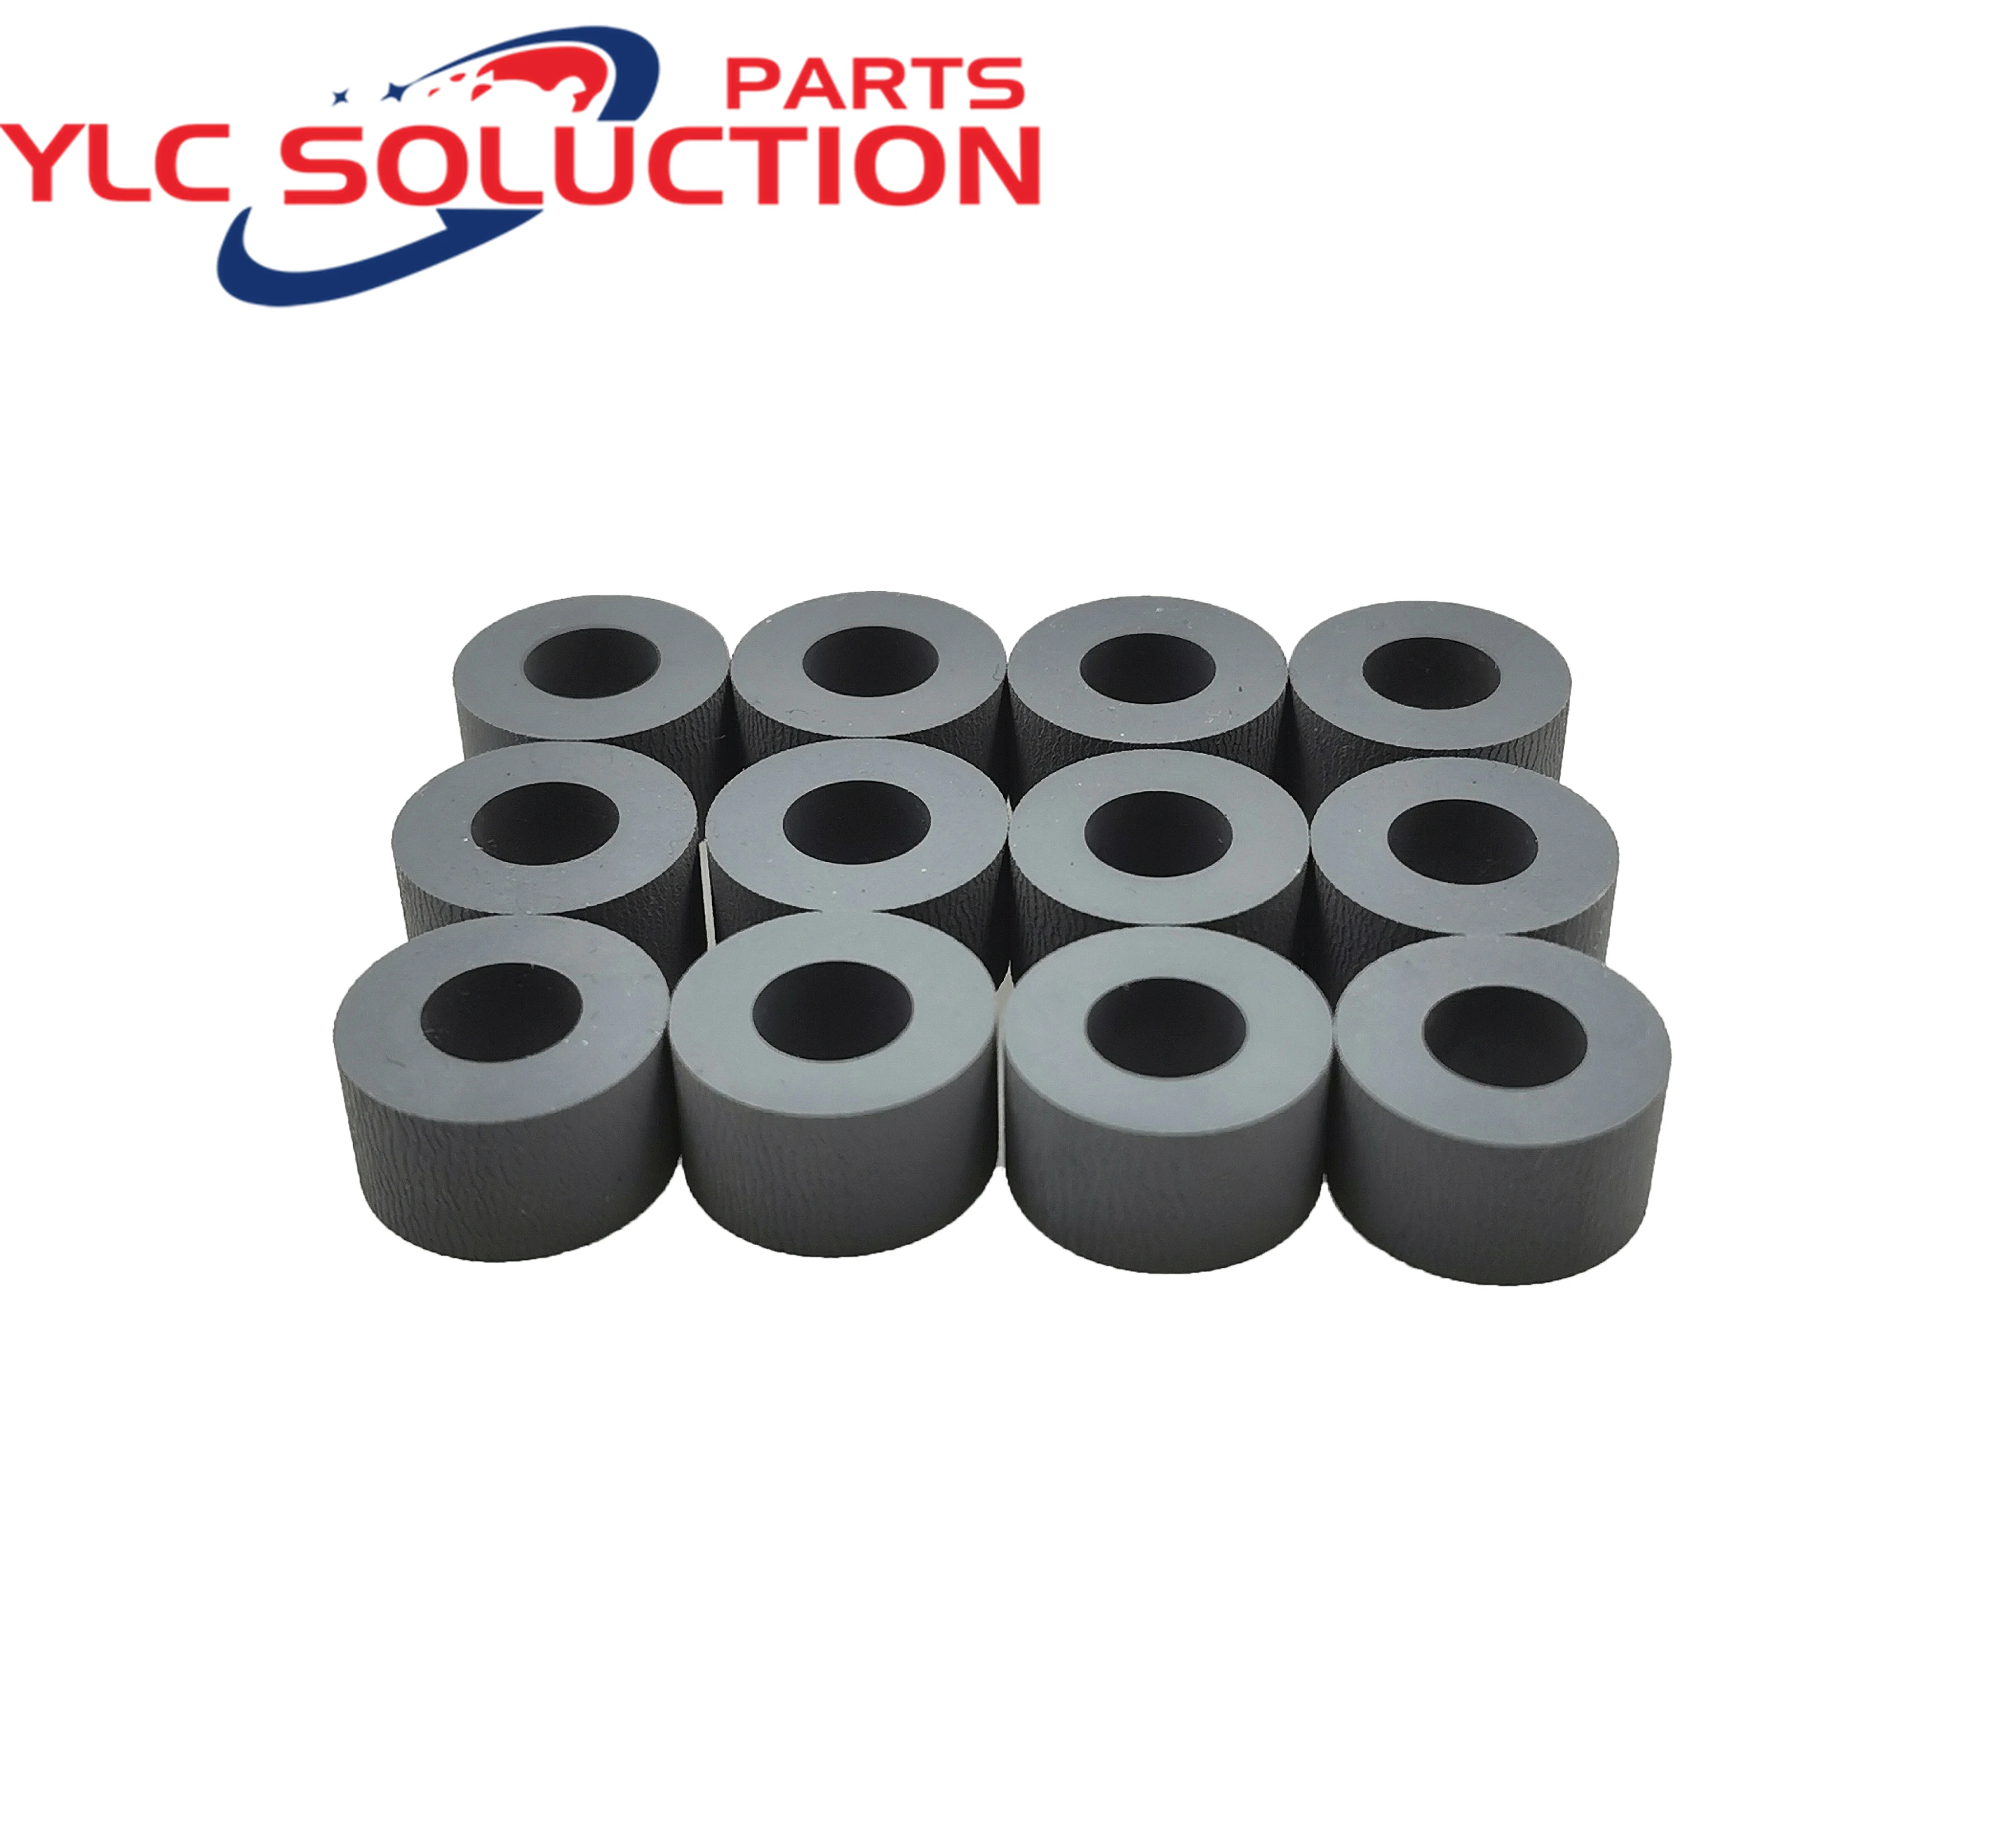 

100X 5335 7525 7535 7775 5325 Feed Roller Tire for Xerox WorkCentre 7655 7665 7675 7755 7765 5330 7425 7428 7435 7530 7545 7556